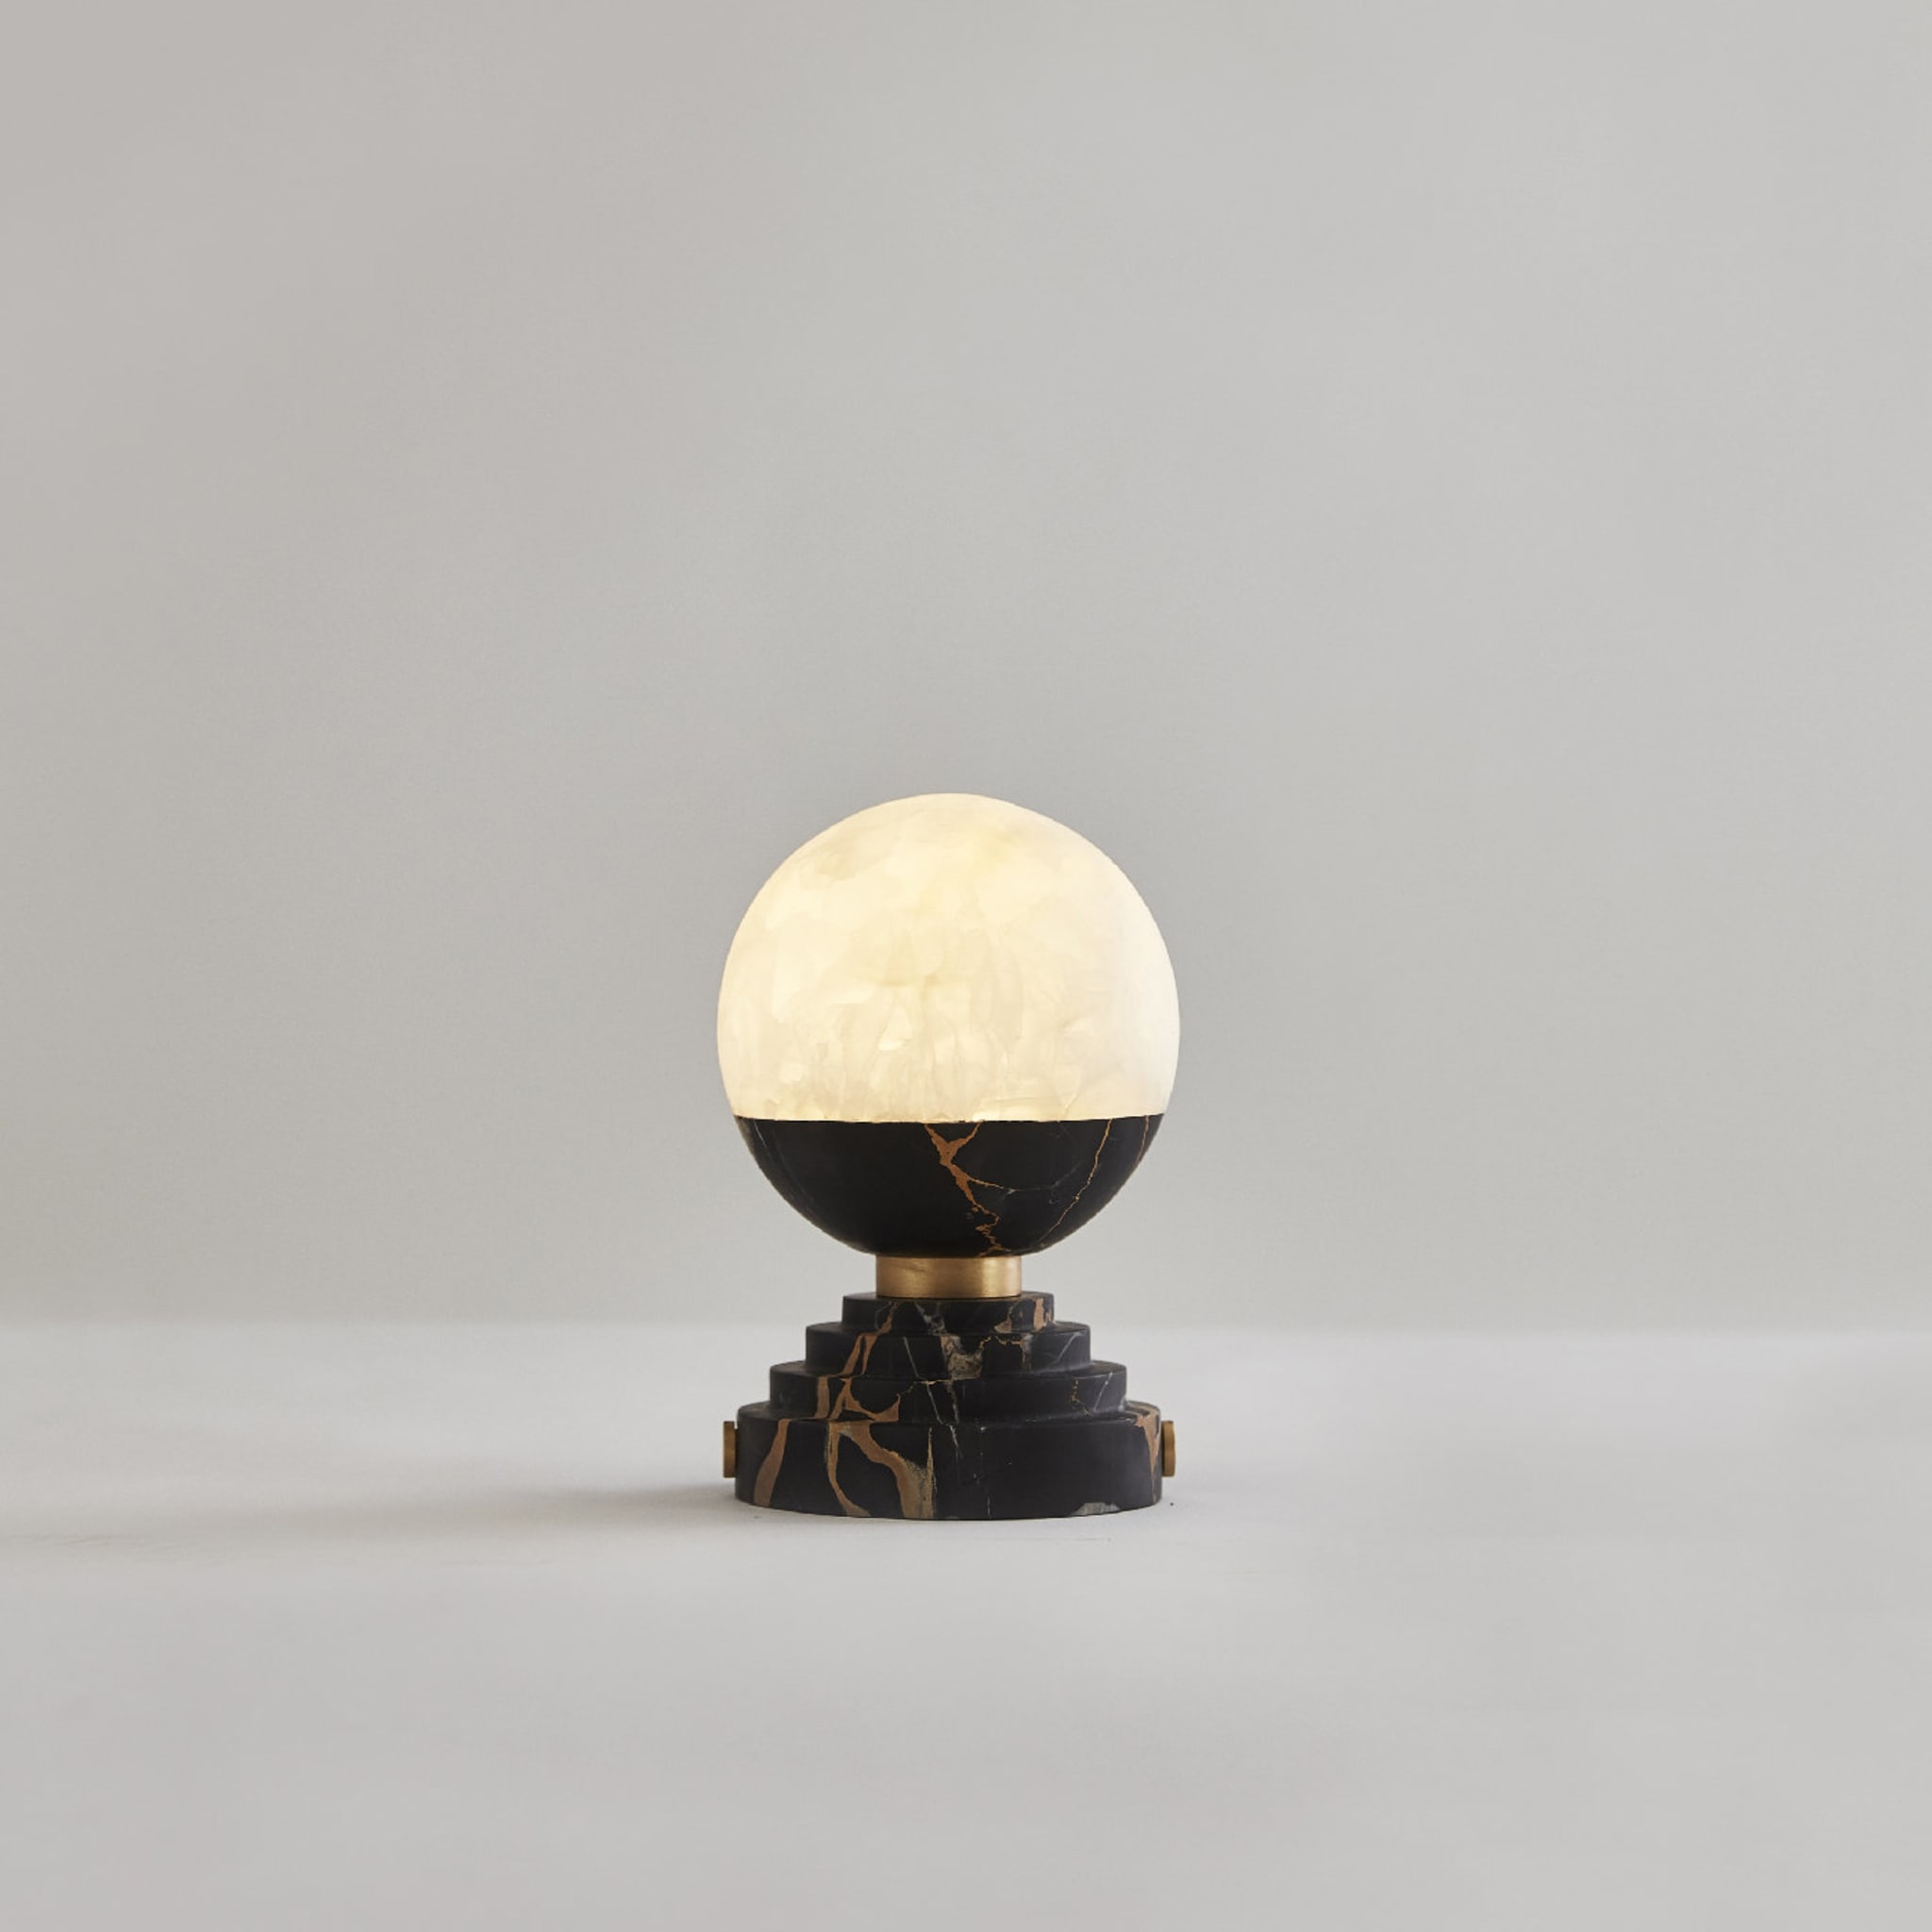 Lunar Table Lamp in Portoro Marble and Onyx  - Alternative view 1